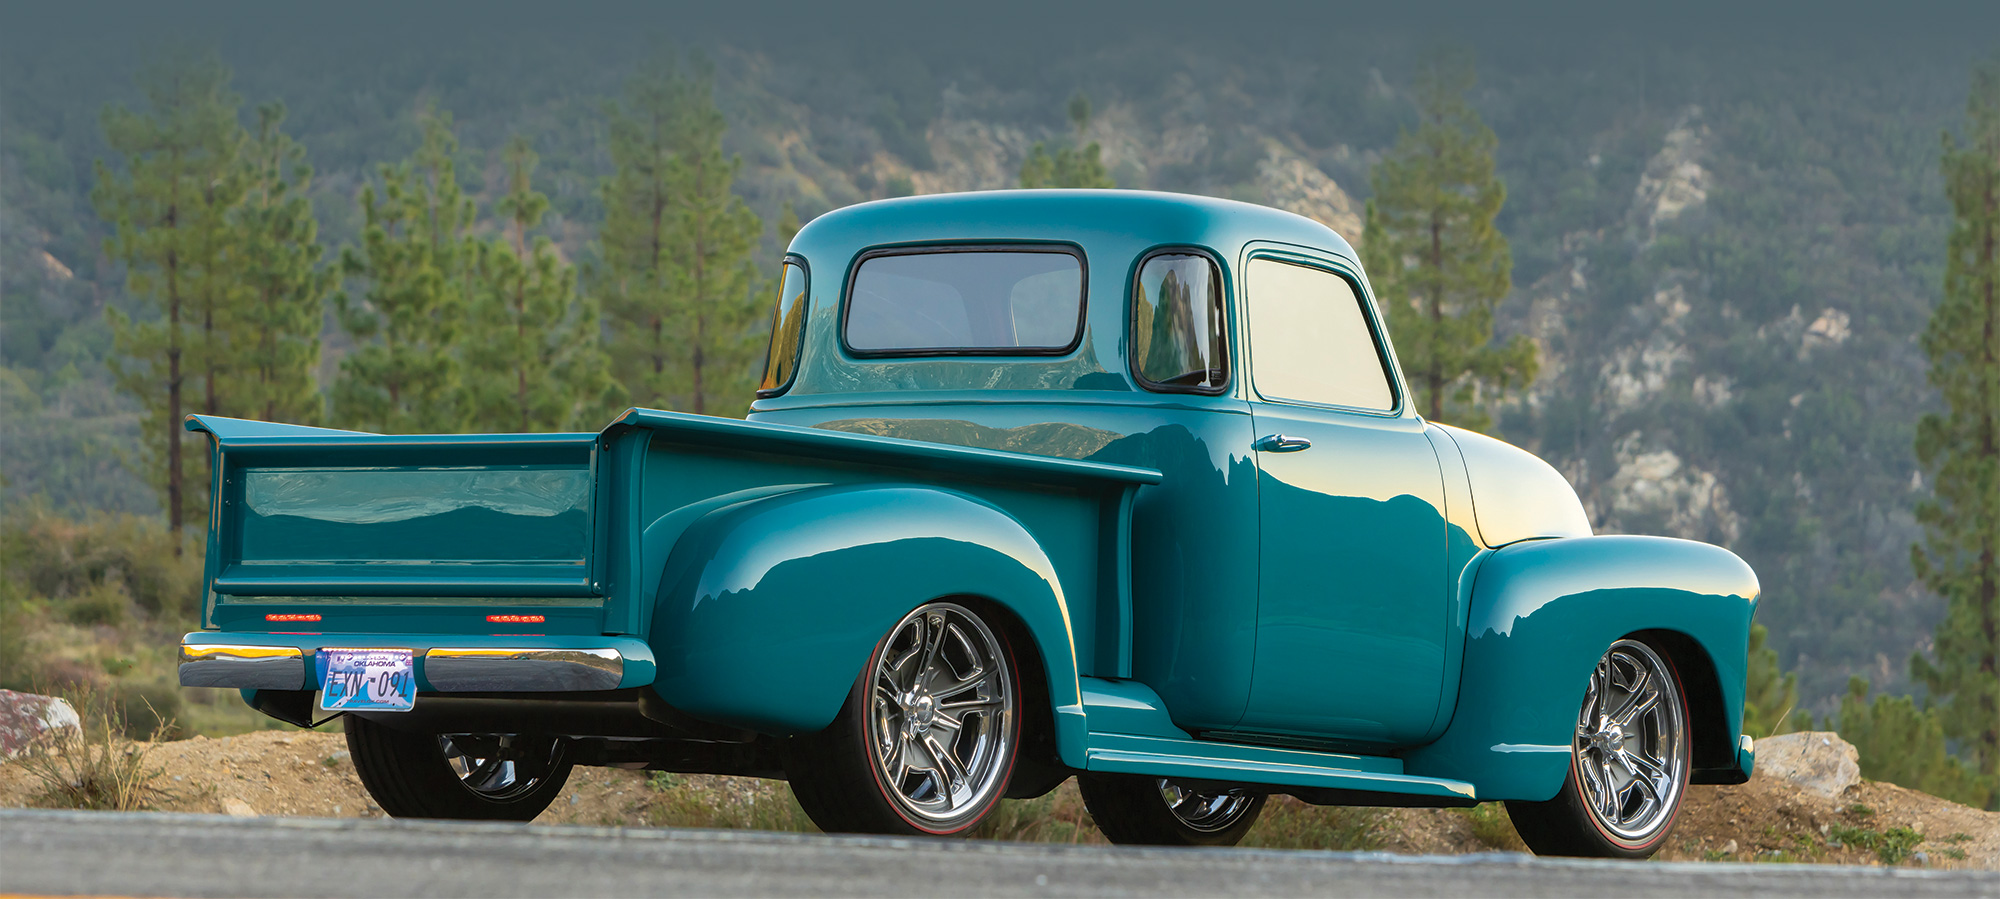 teal '54 Chevy side profile